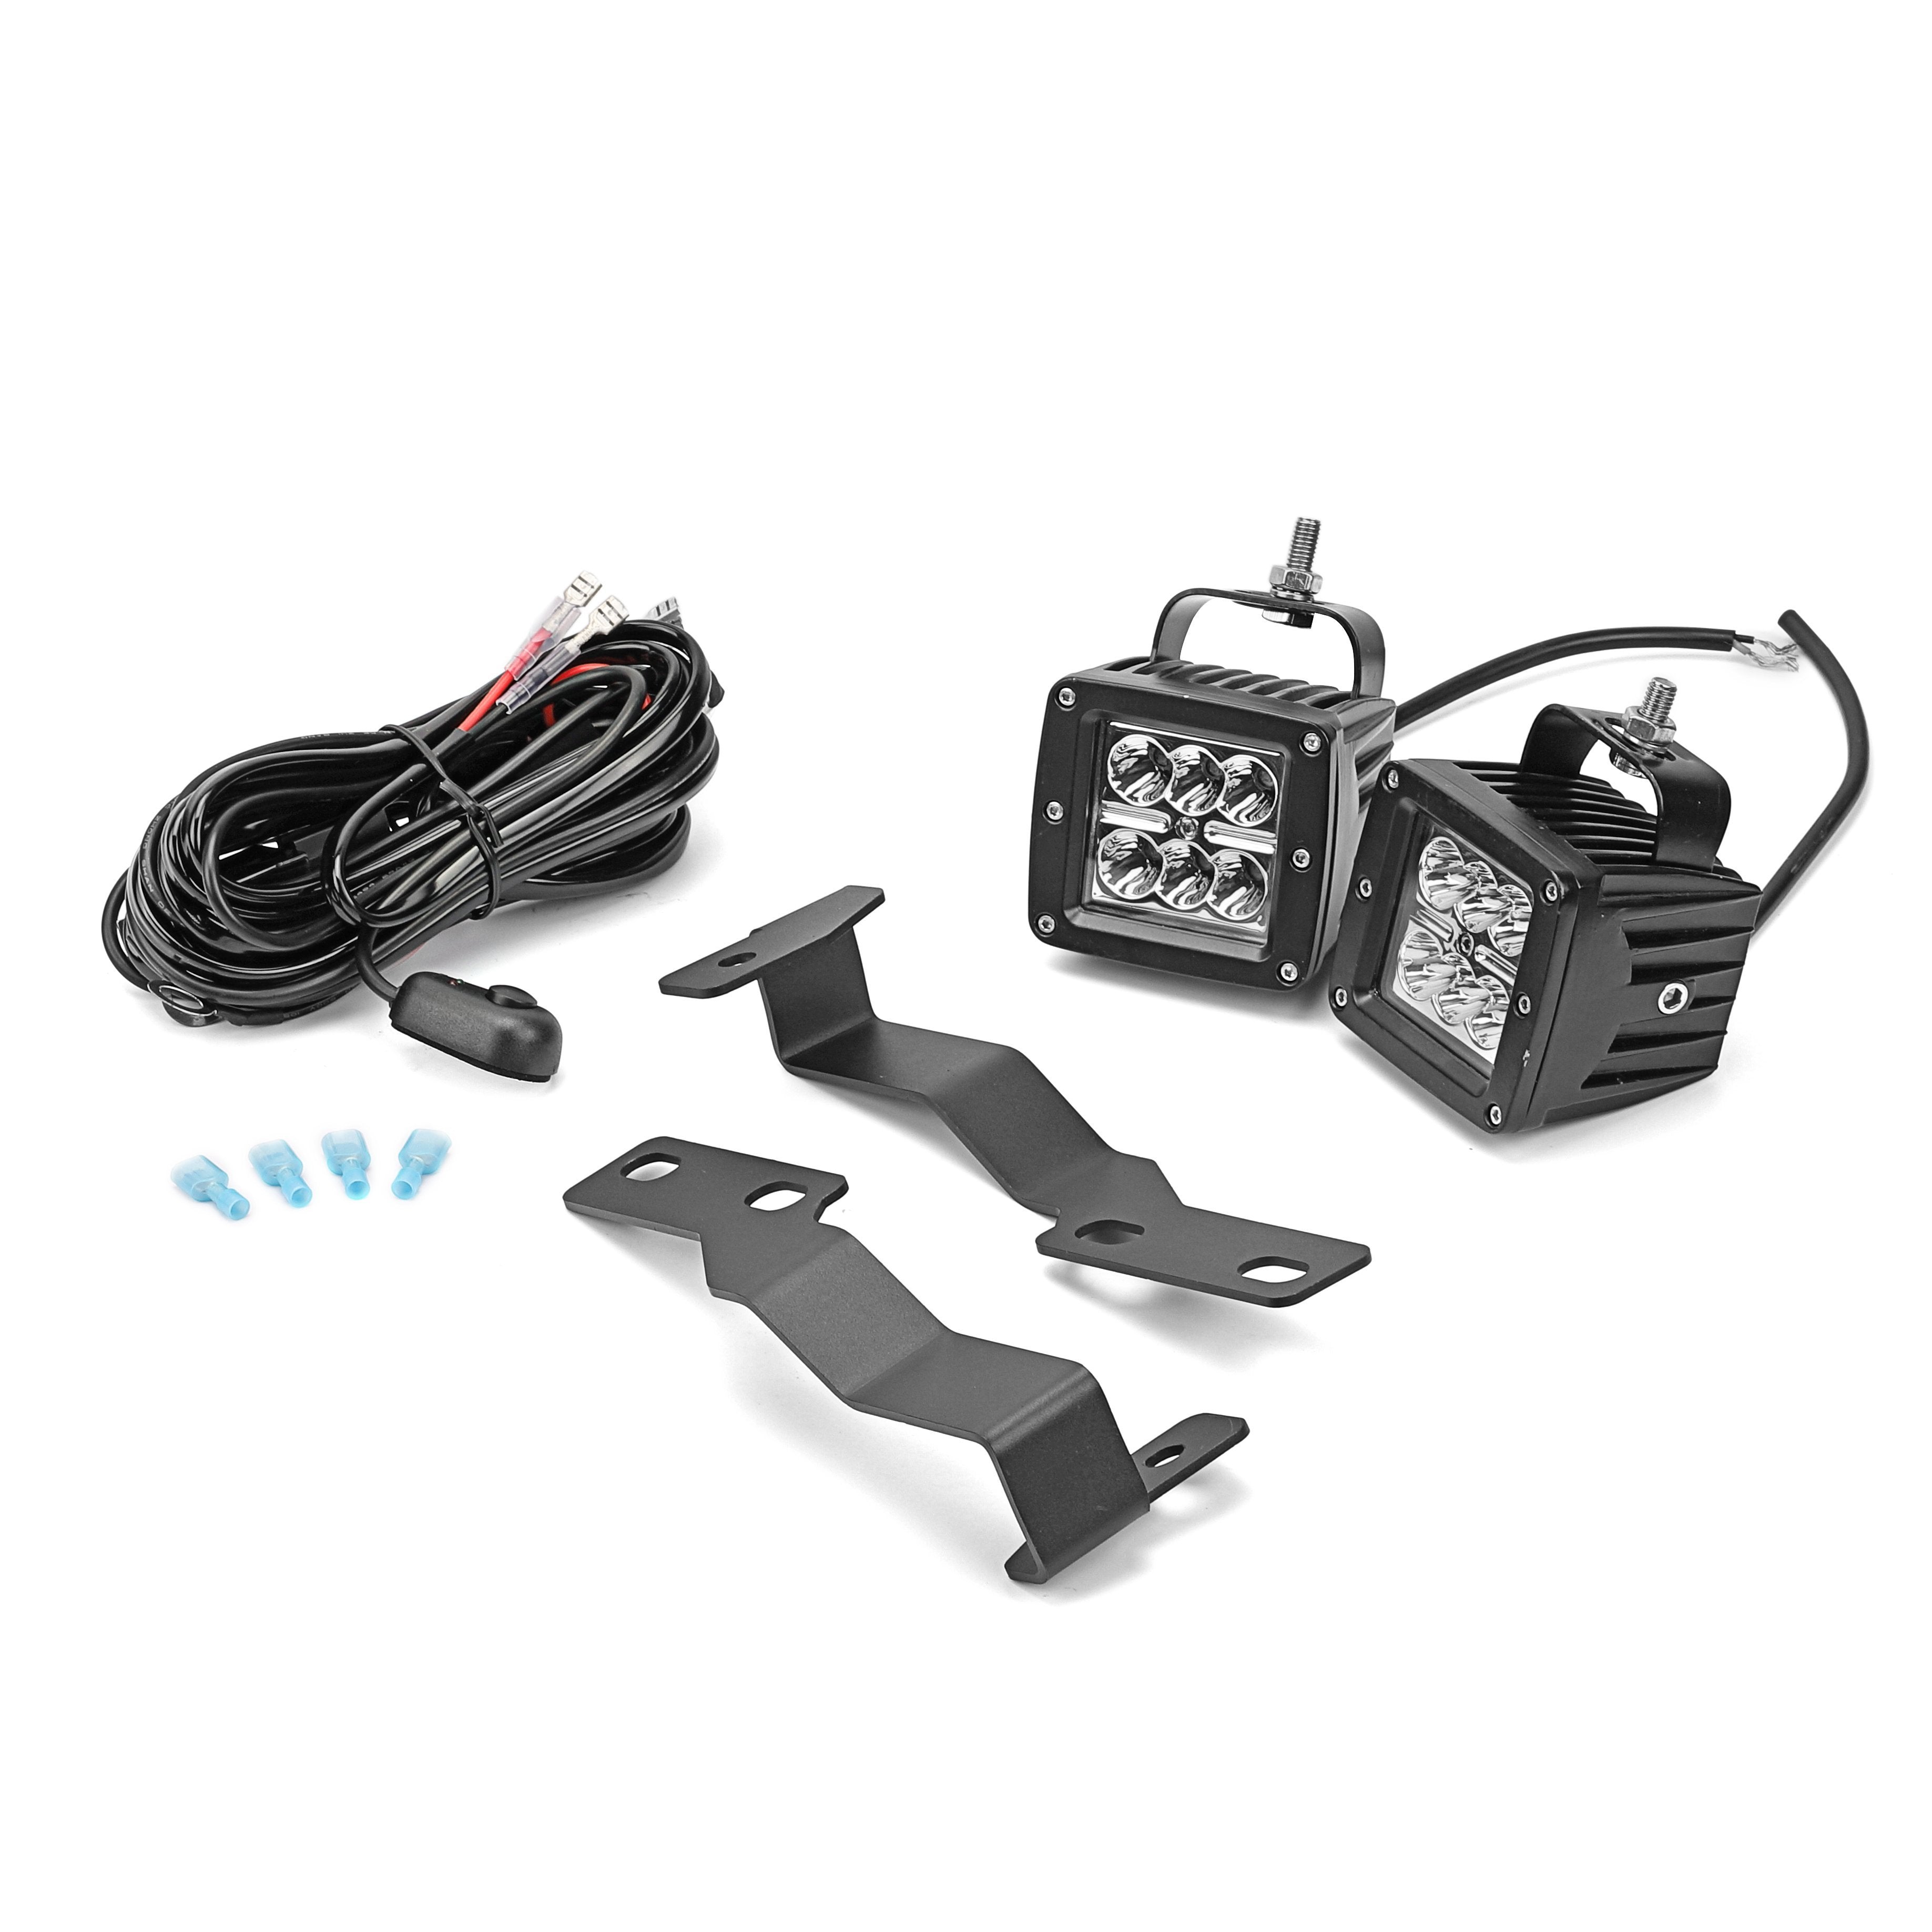 Toyota Tacoma 2005-2015 Upper Hood Ditch Cube 2x 24W Side View LED Lights Pod Bracket Mount Wire Kit - Weisen